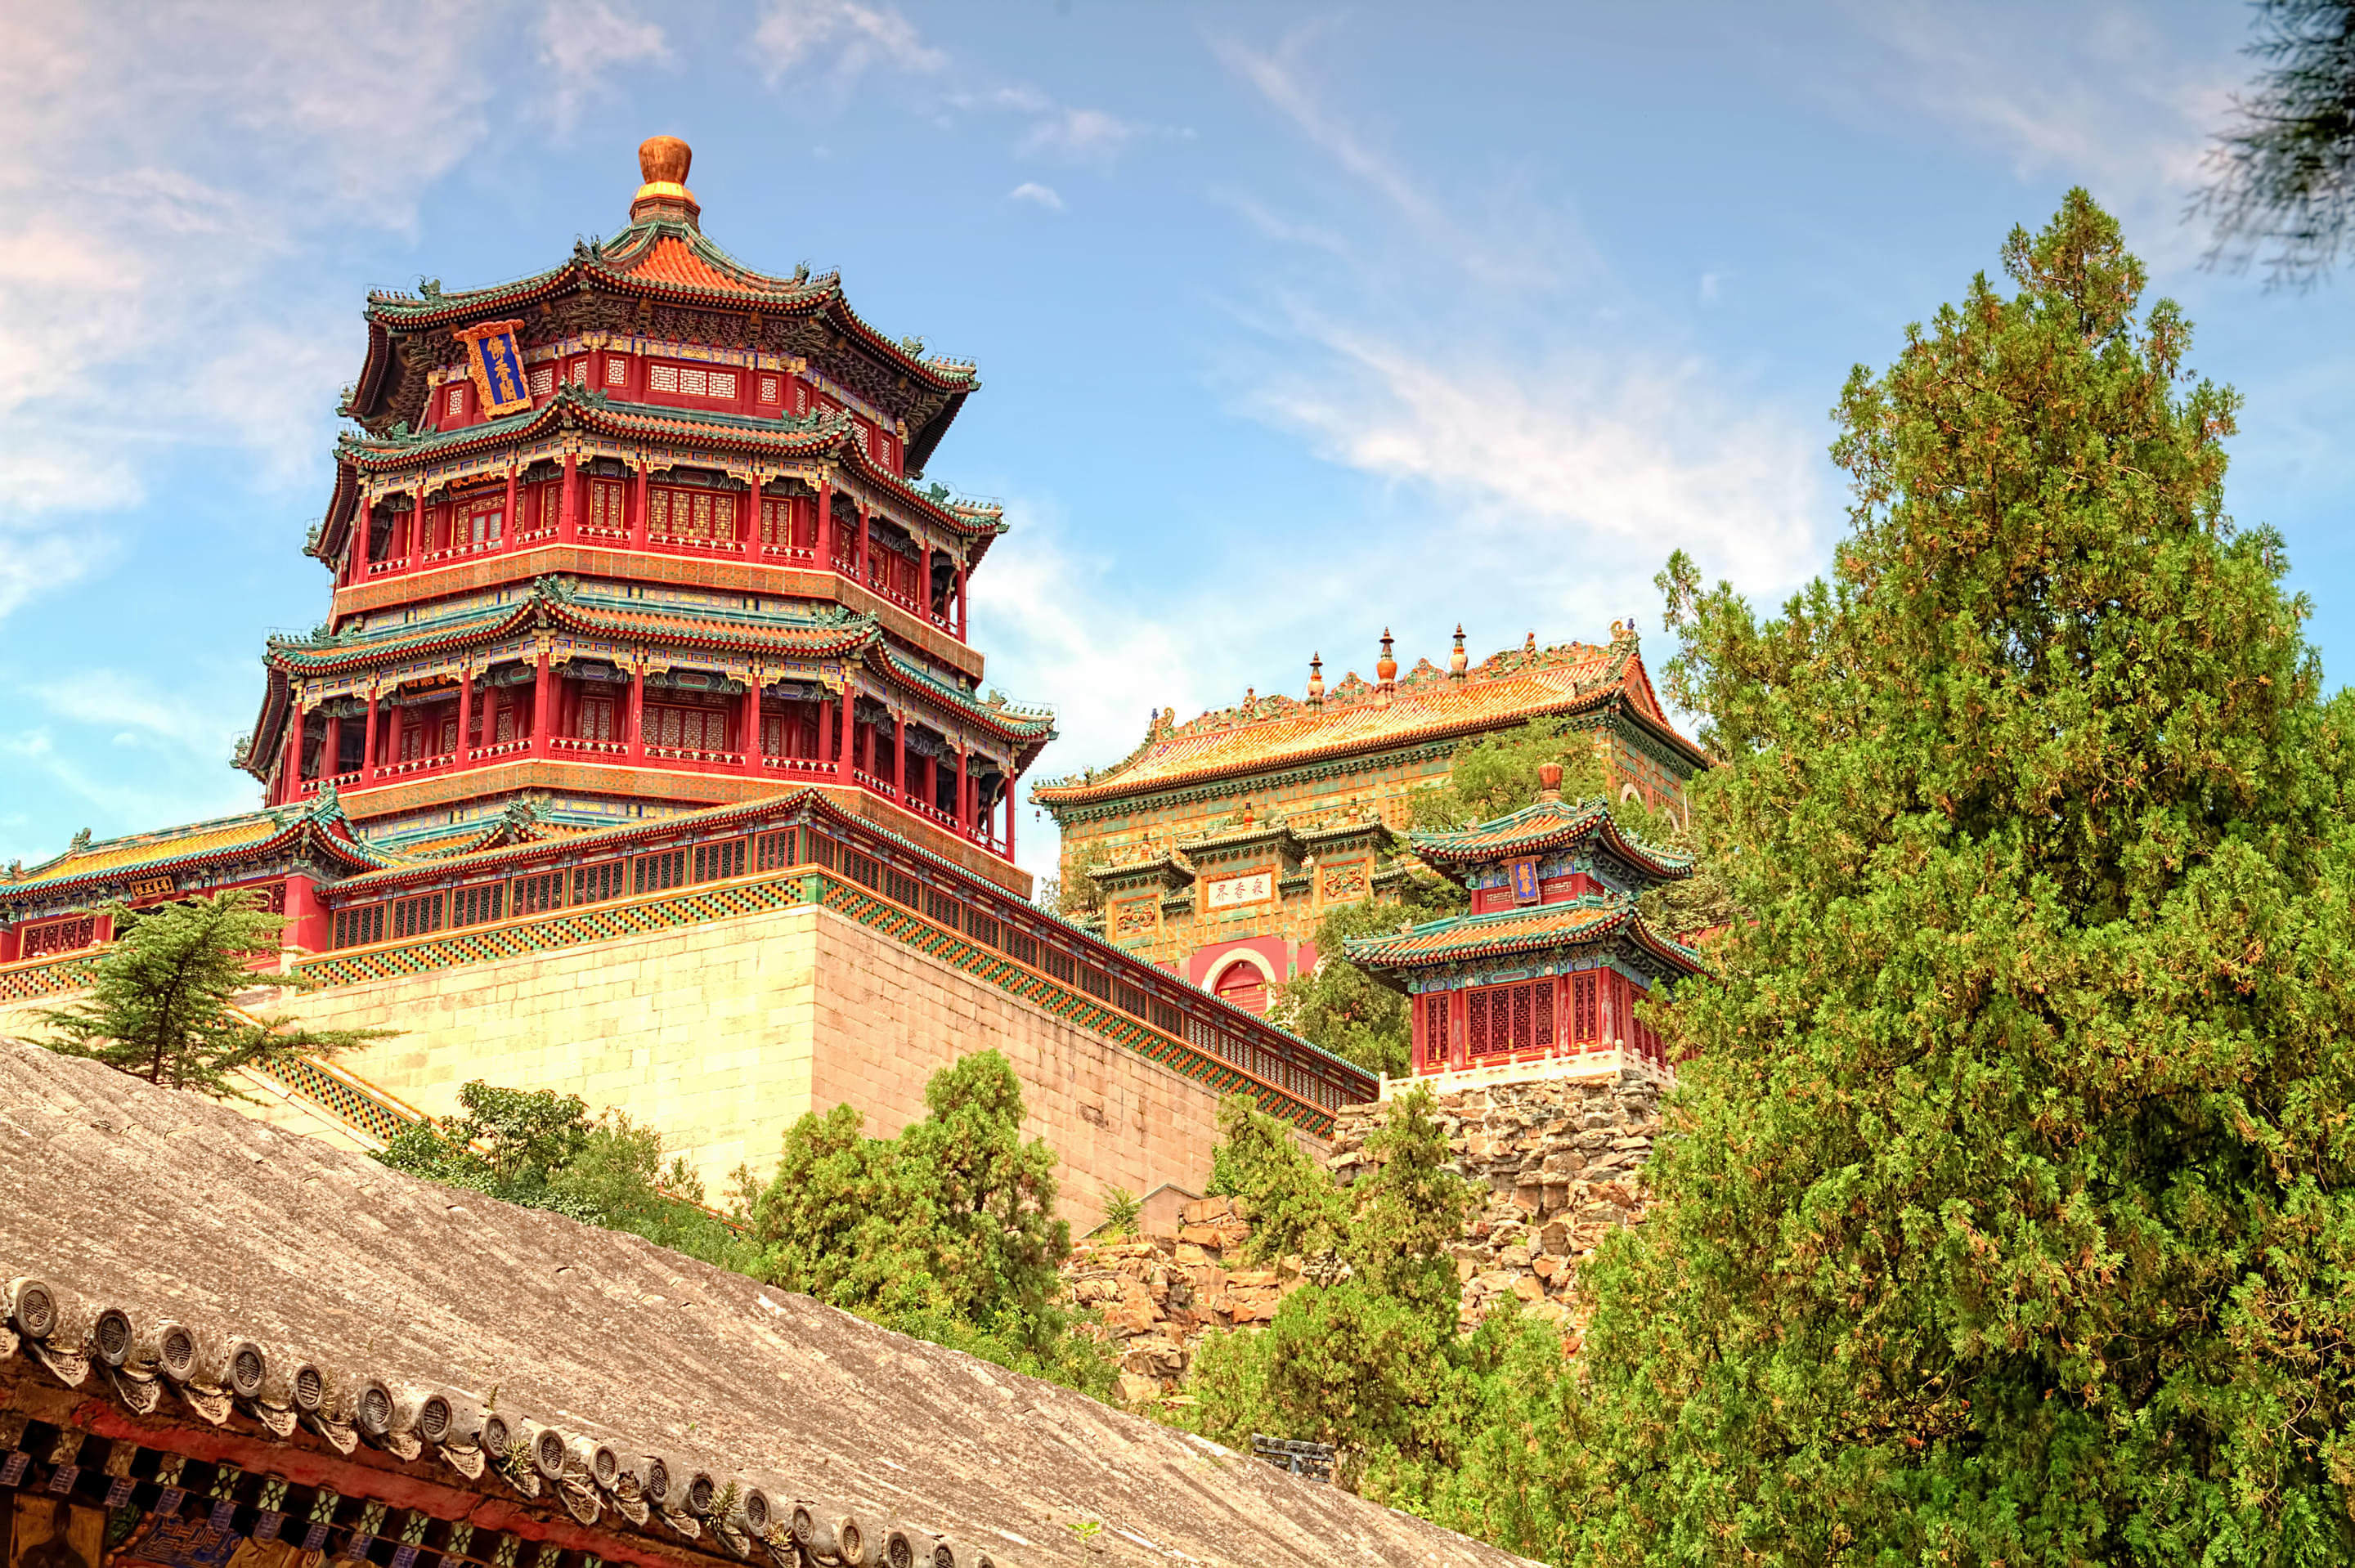 The Summer Palace Overview